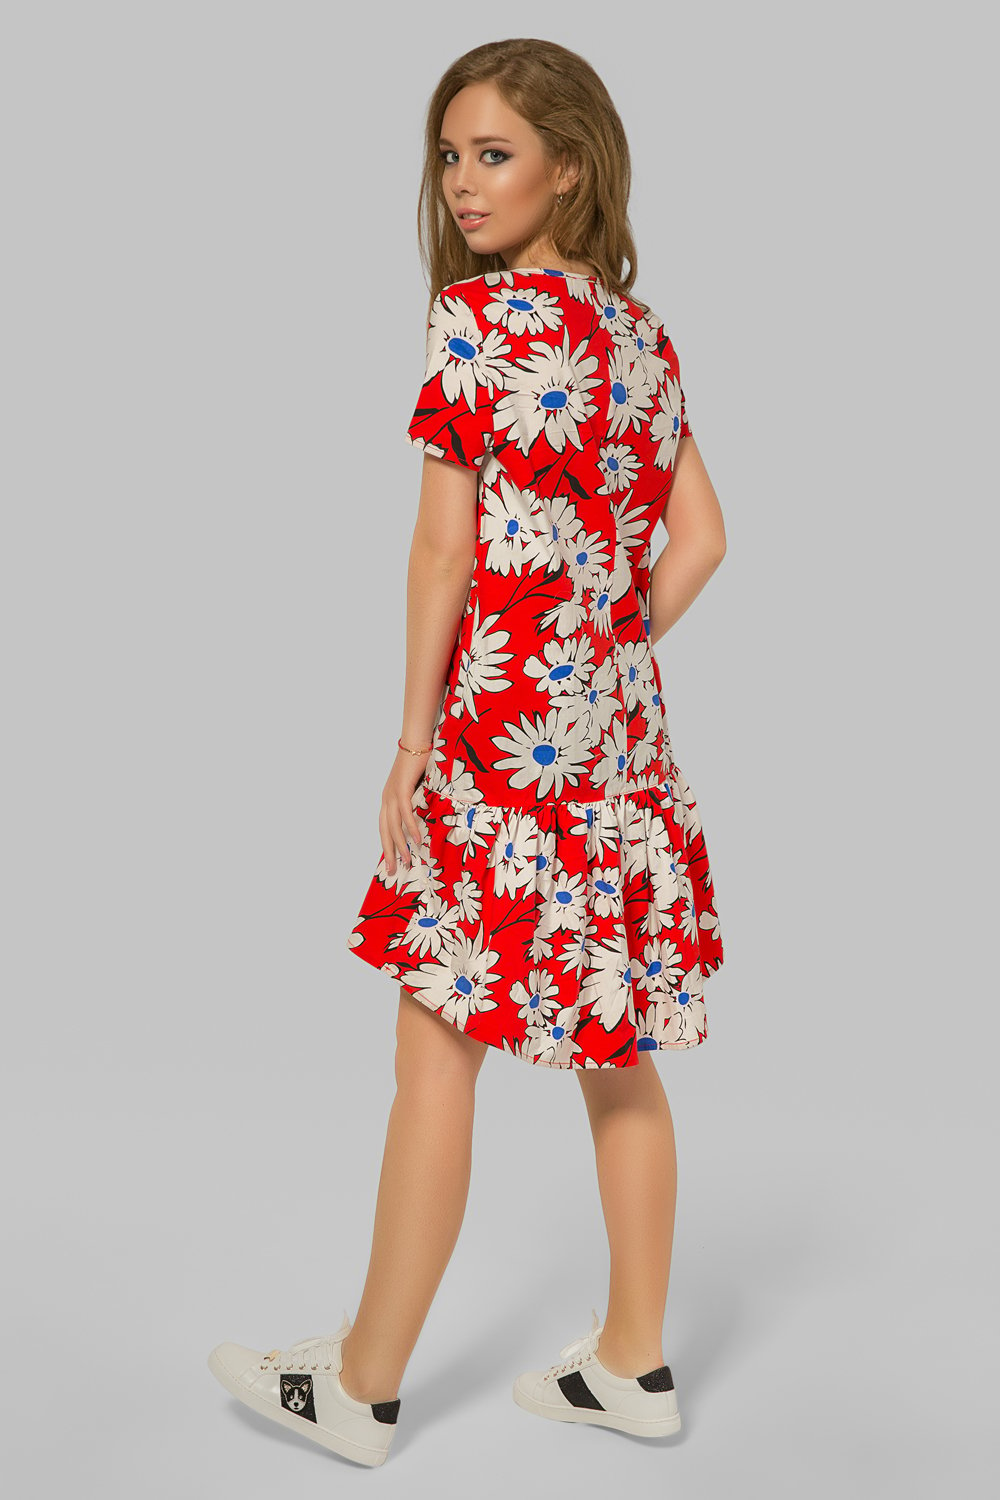 Floral print dress in red